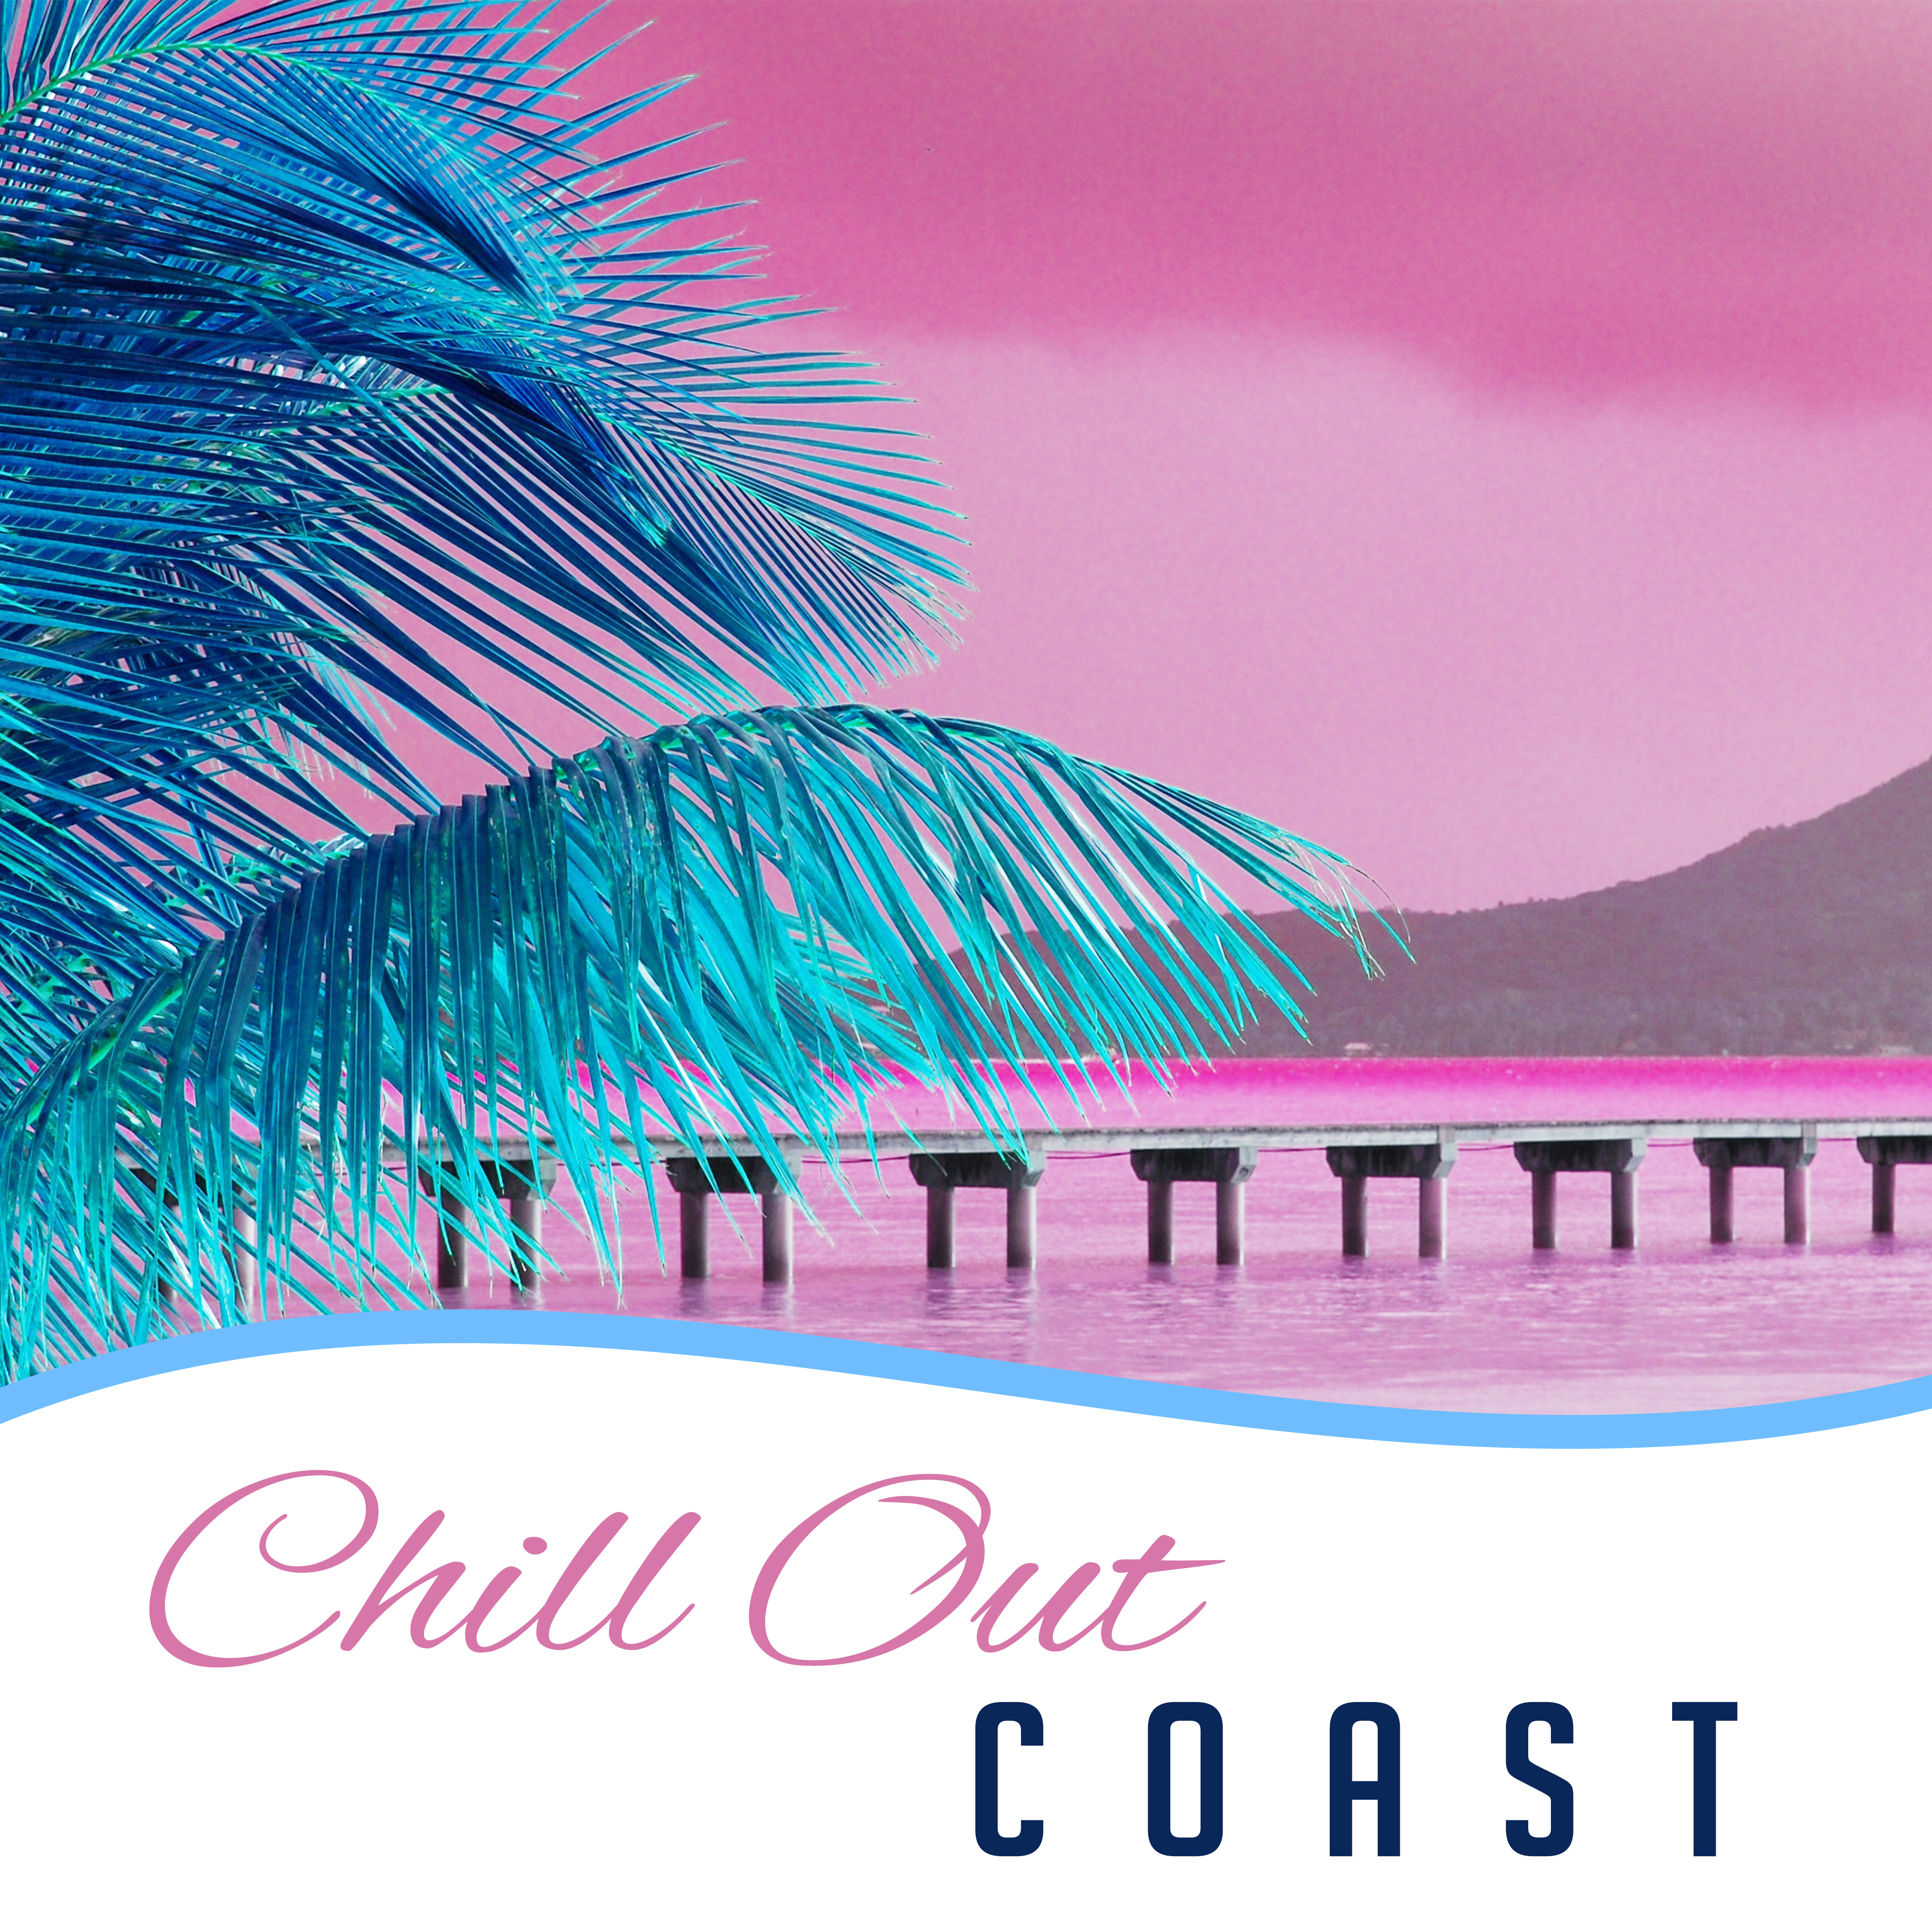 Chill Out Coast – Summer Music, Chillout Lounge, Relax, By the Sea, Sunset, Good Vibes